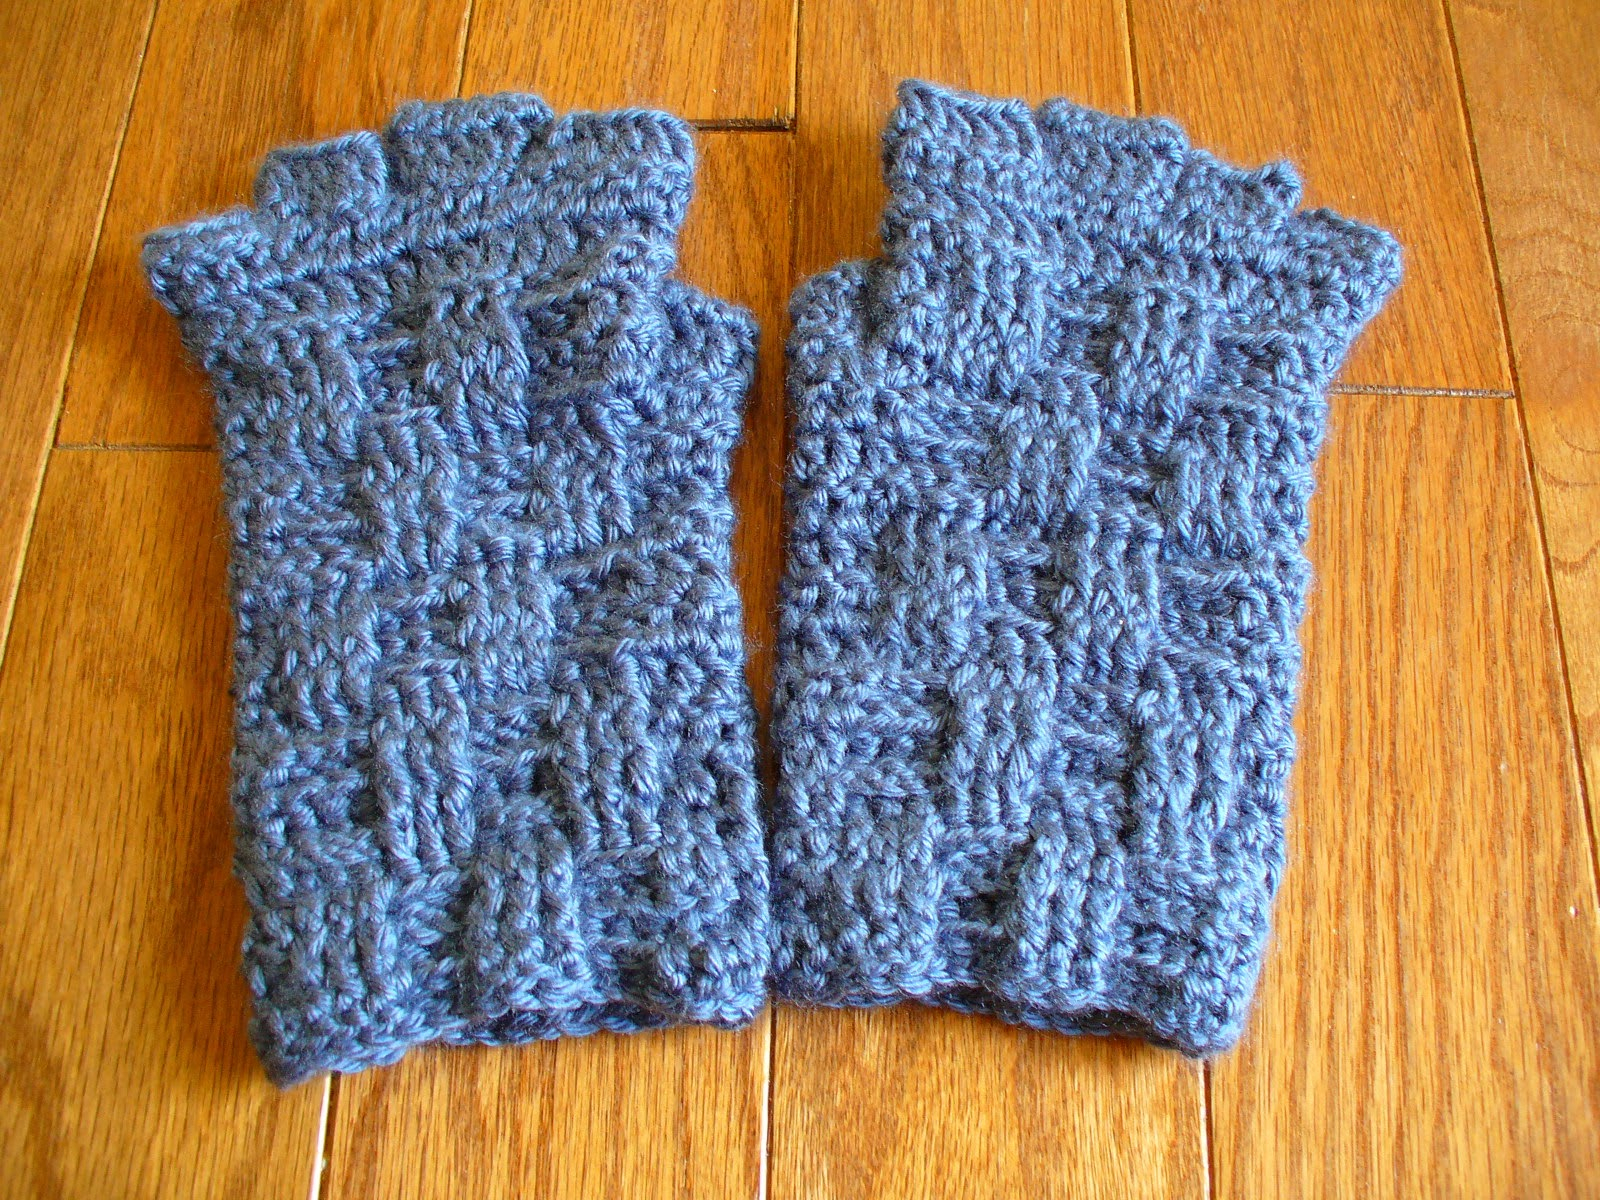 Crochet Gloves Pattern With Fingers Sanity Stitches Basket Weave Fingerless Gloves Pattern